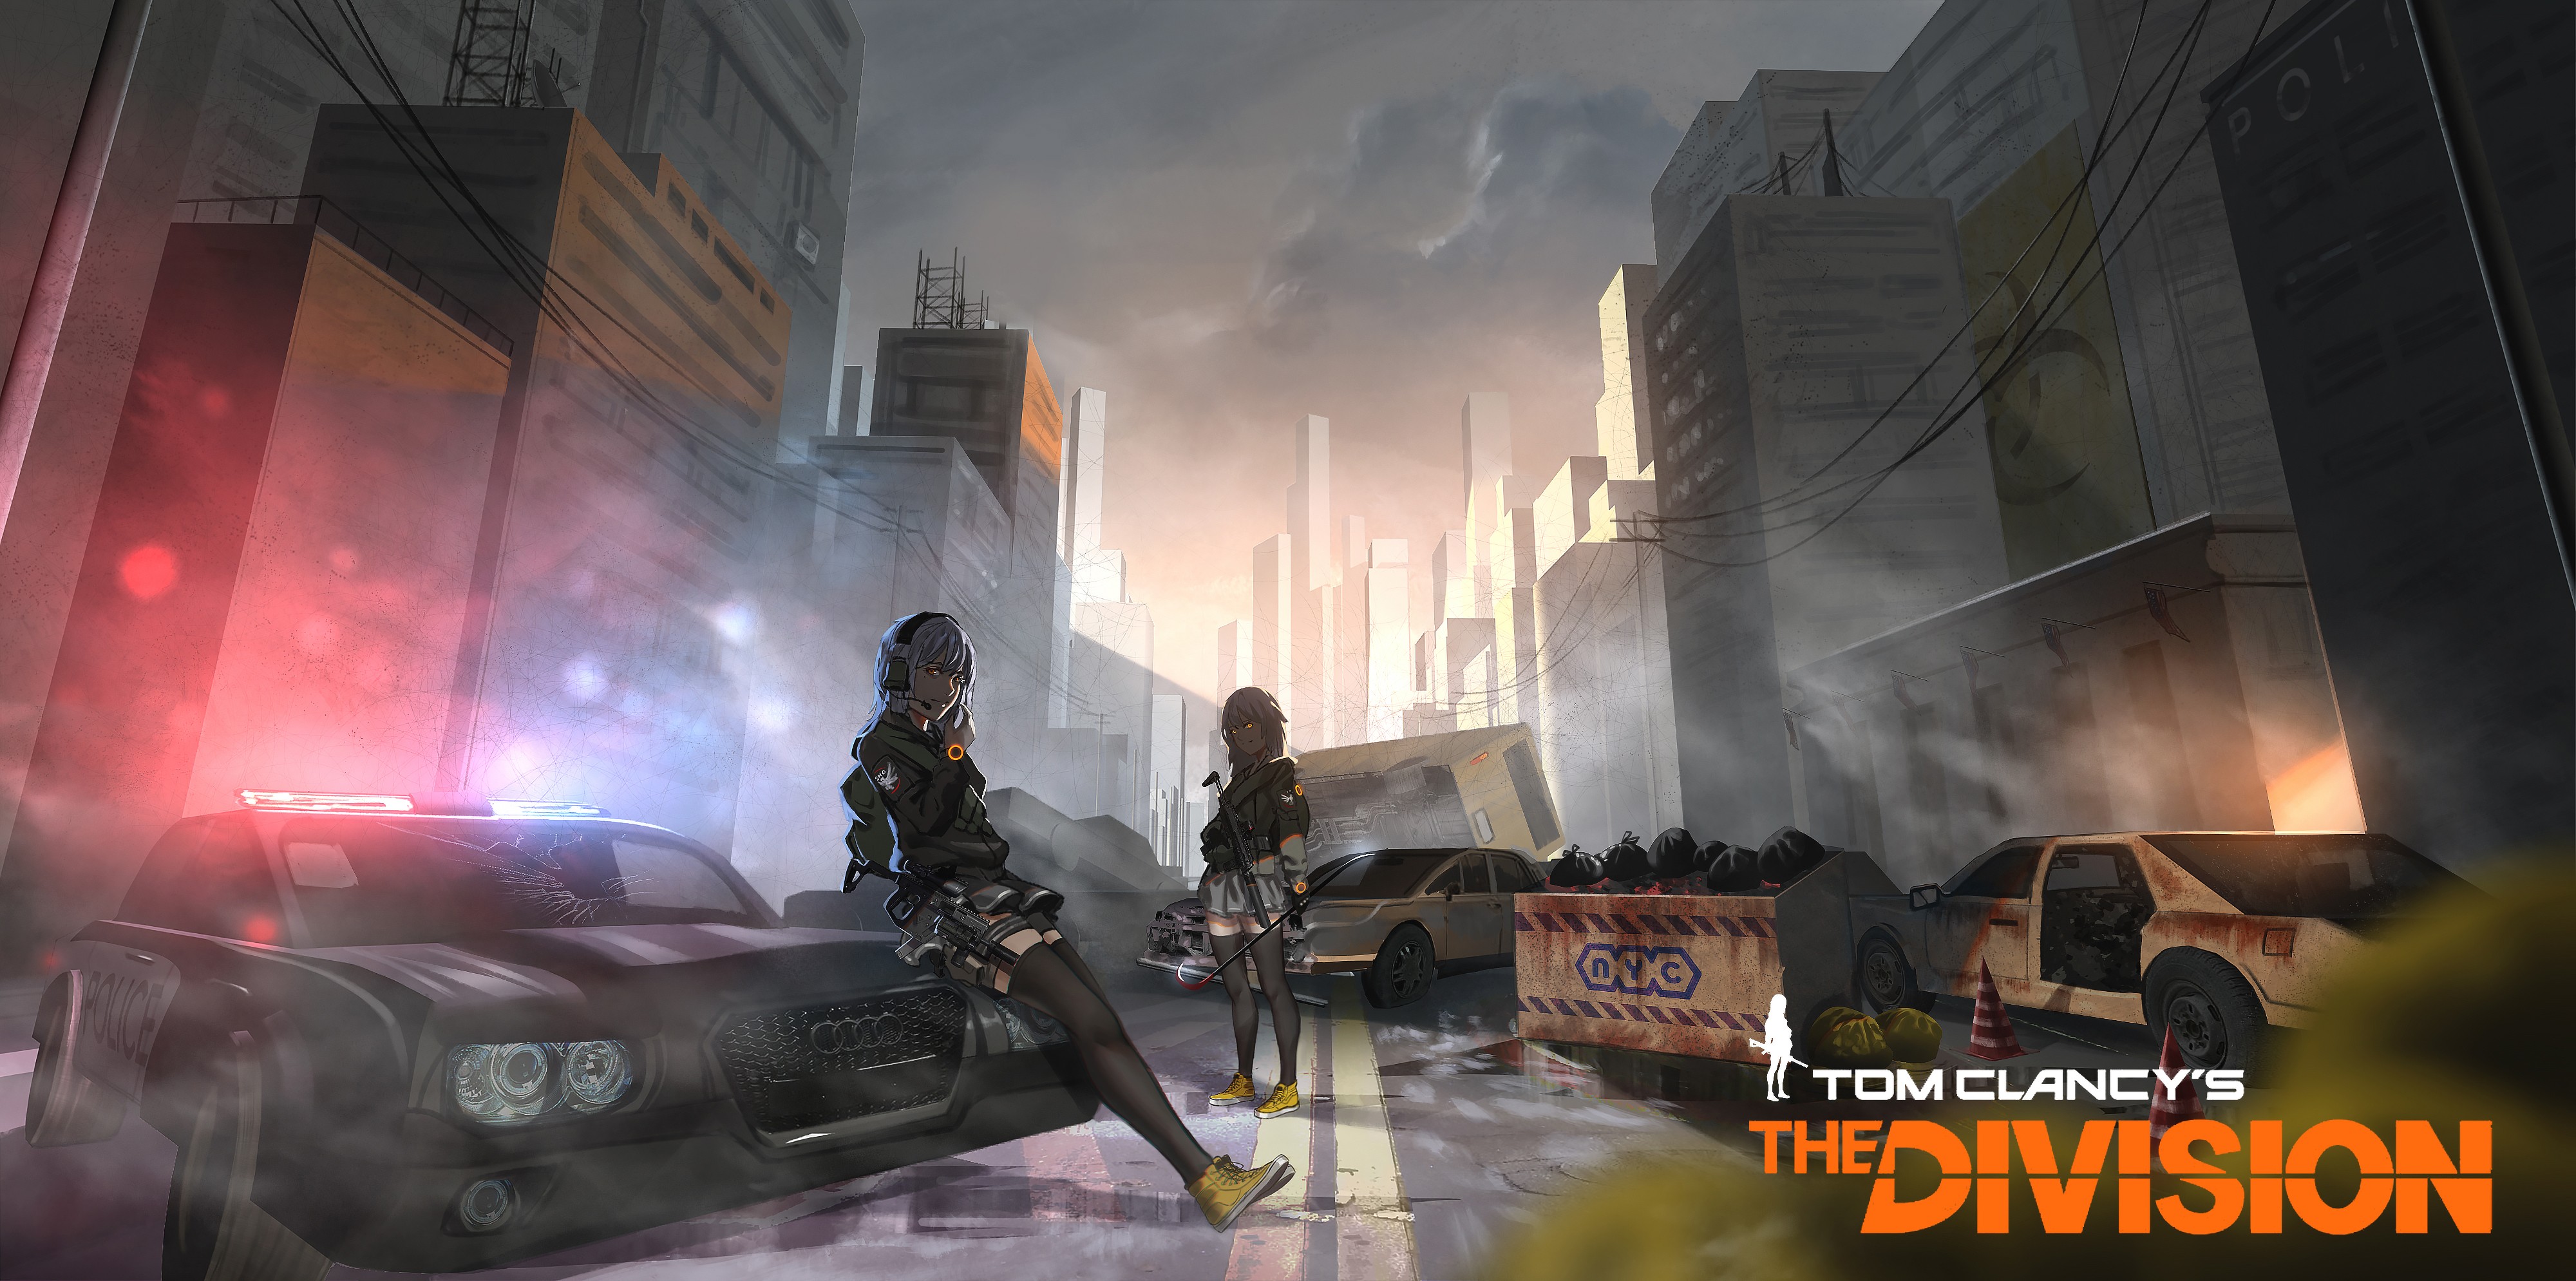 Anime Anime Girls Tom Clancys The Division Weapon Zettai Ryouiki Original Characters 4000x1989